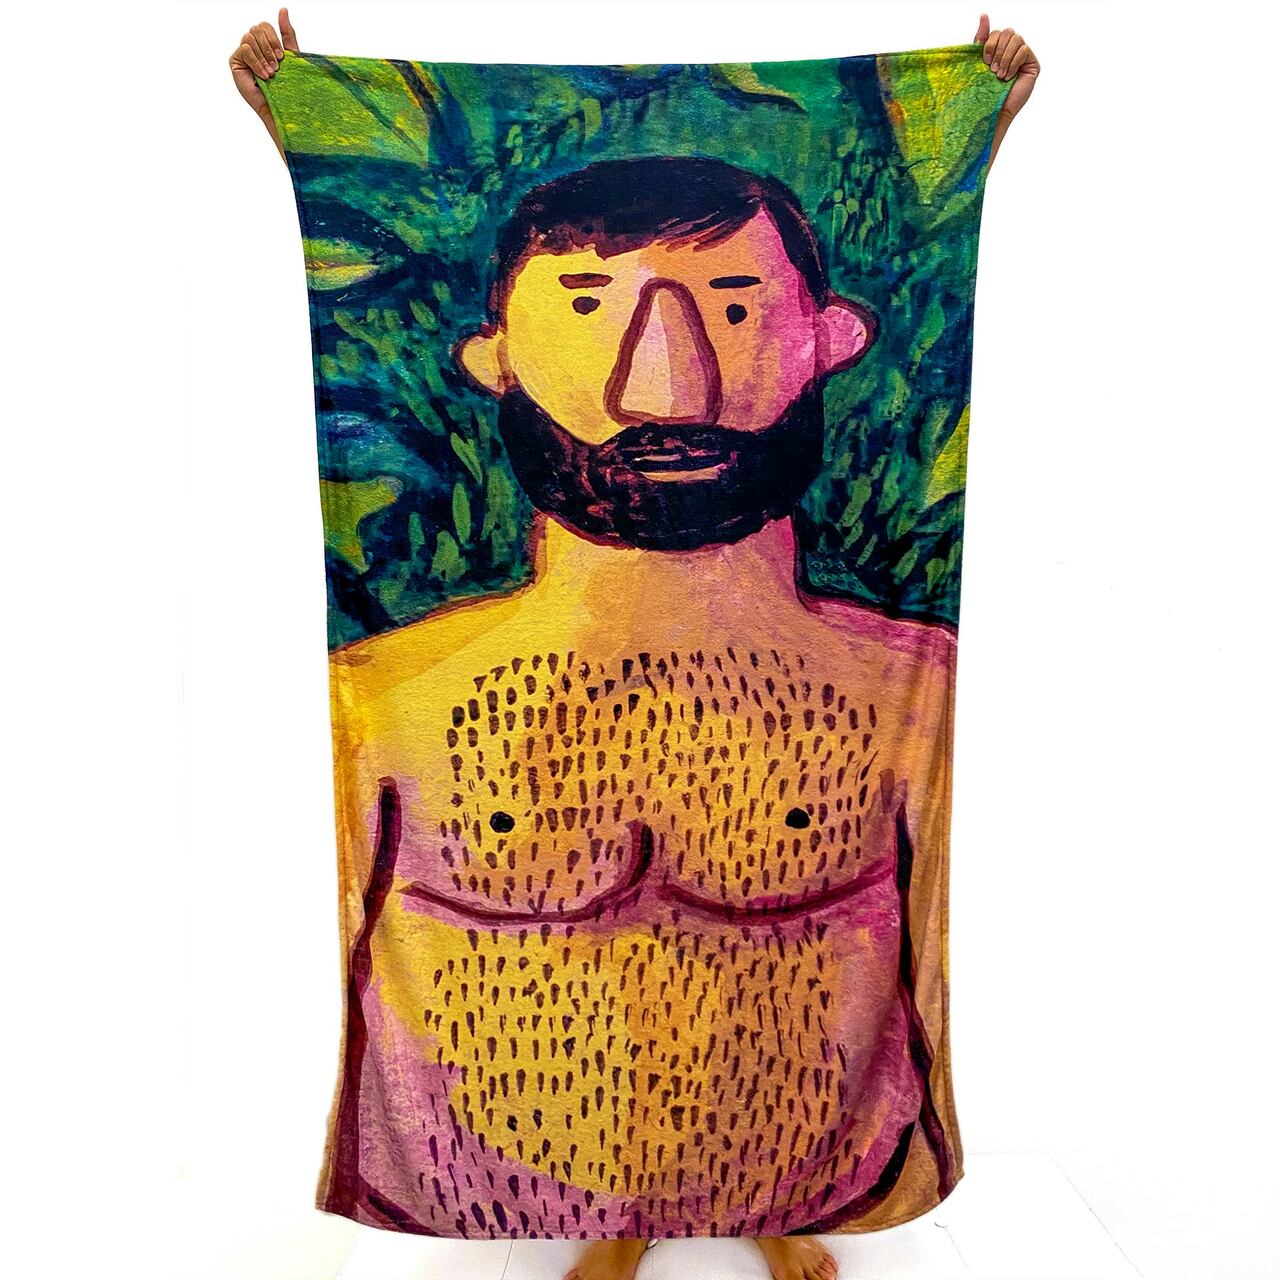 Carlos Rodriguez beach towel from the Horns of Plenty collection